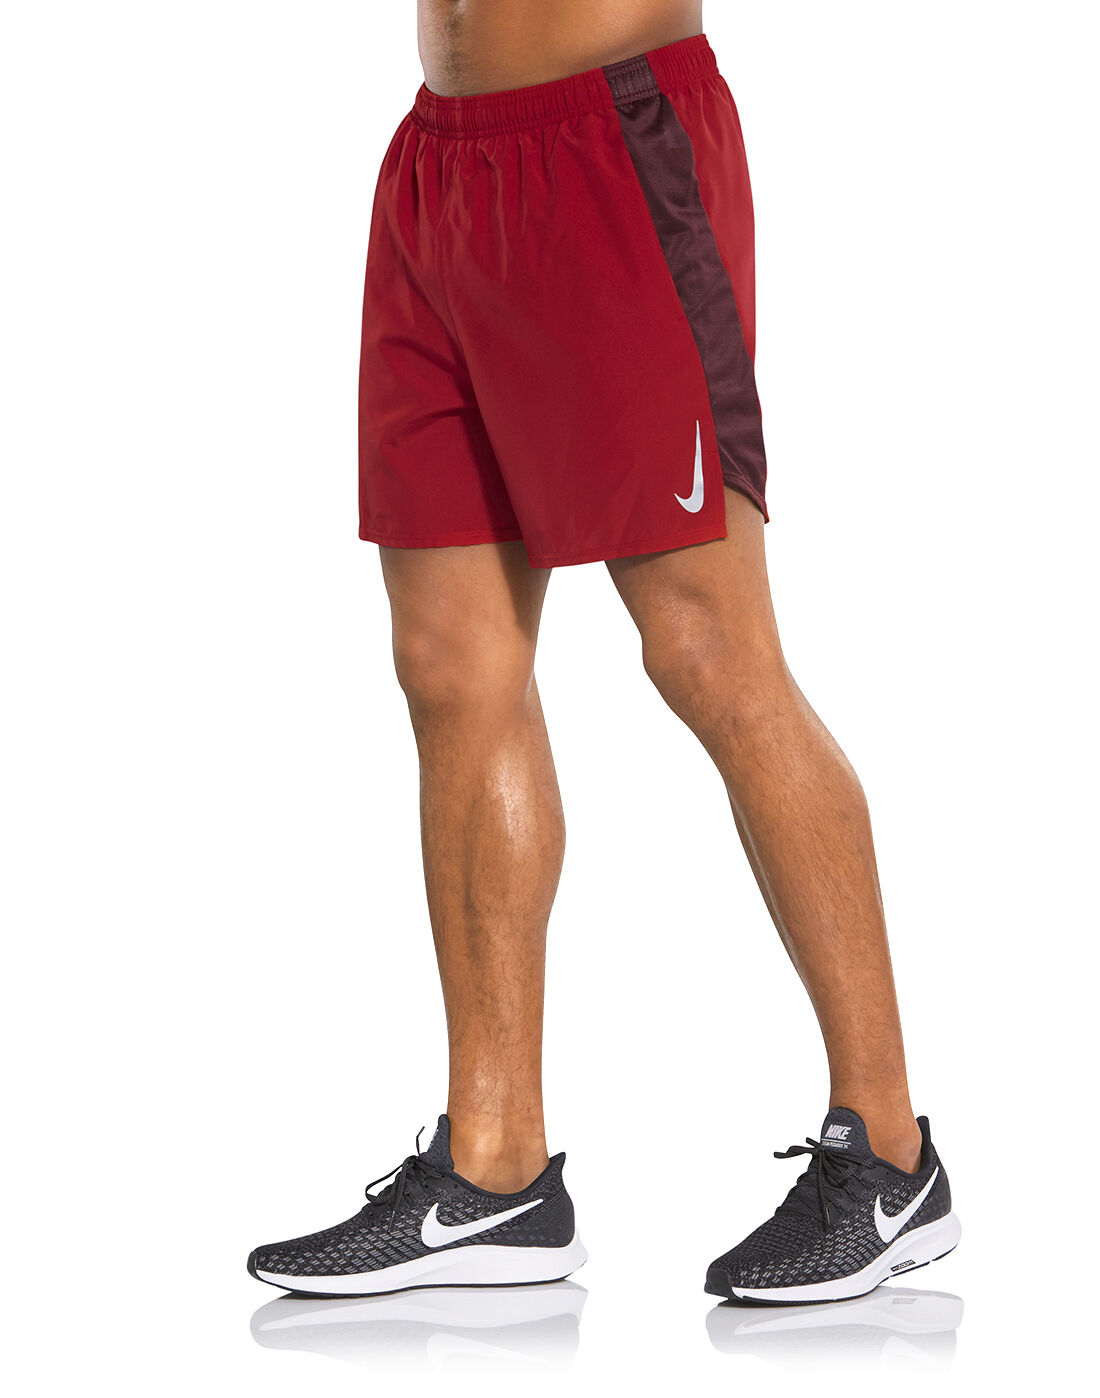 Men's Red Nike Challenger 5 Inch Shorts 